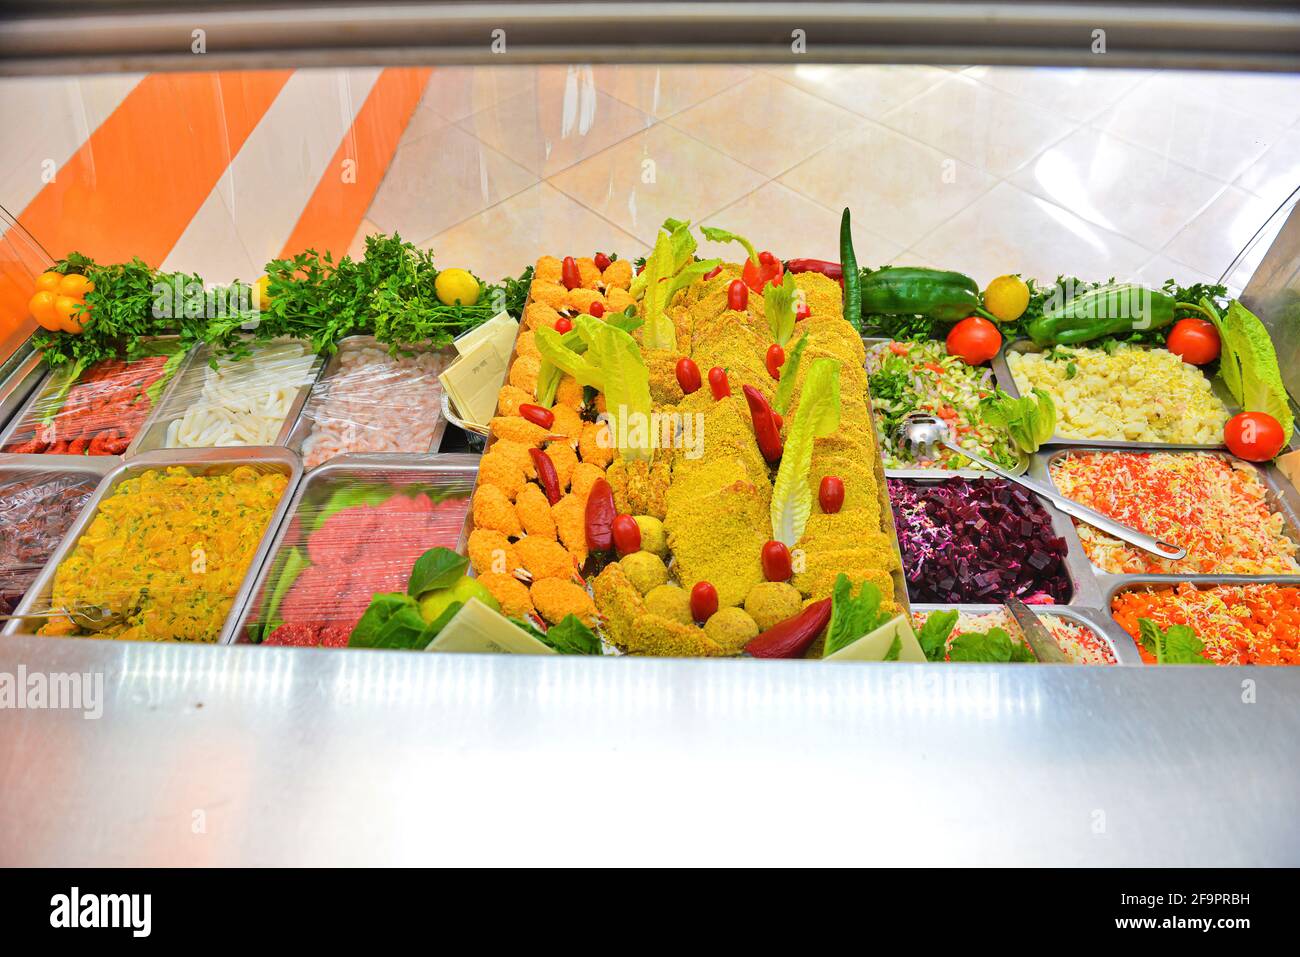 Preparing sandwiches, storefront for sandwiches. The concept of unhealthy eating. Stock Photo